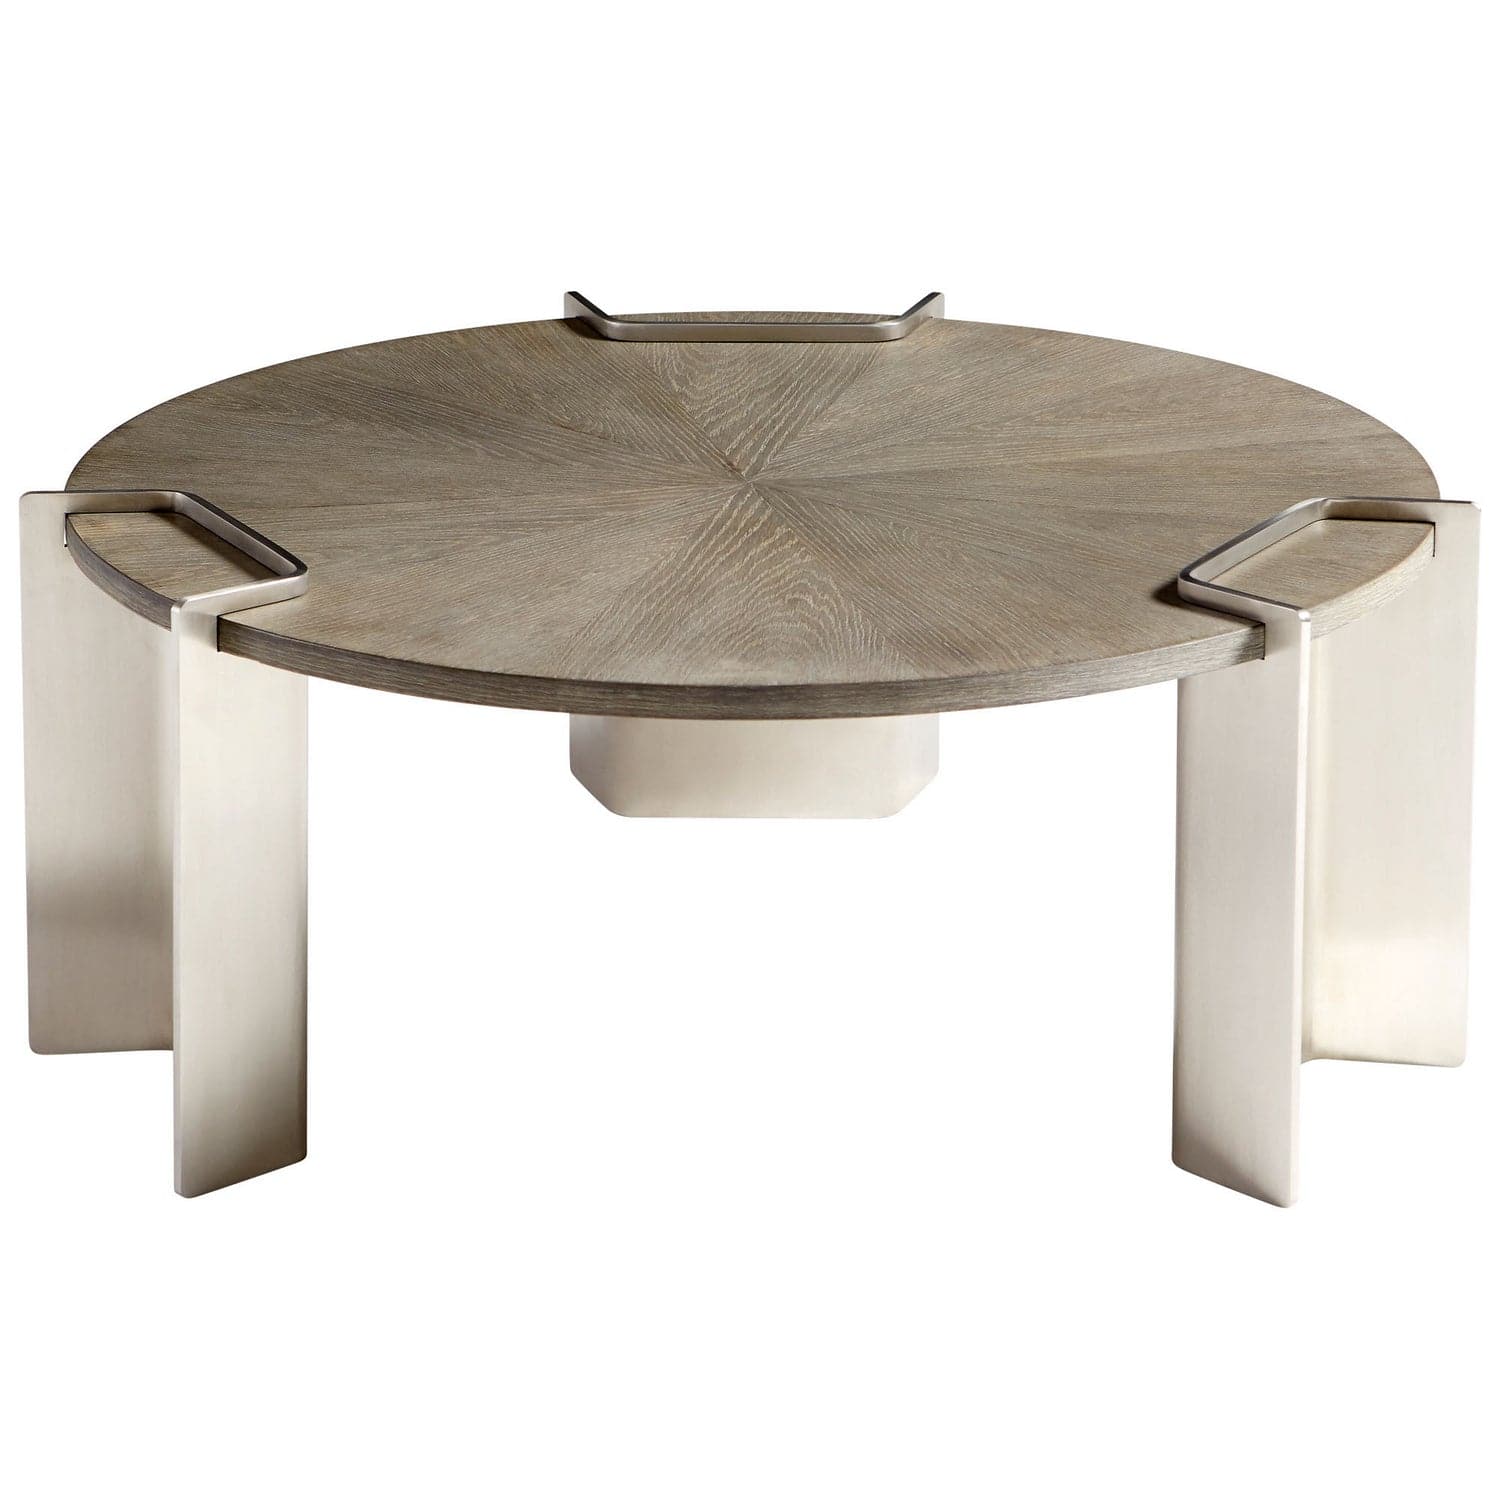 Cyan - 10226 - Coffee Table - Weathered Oak And Stainless Steel